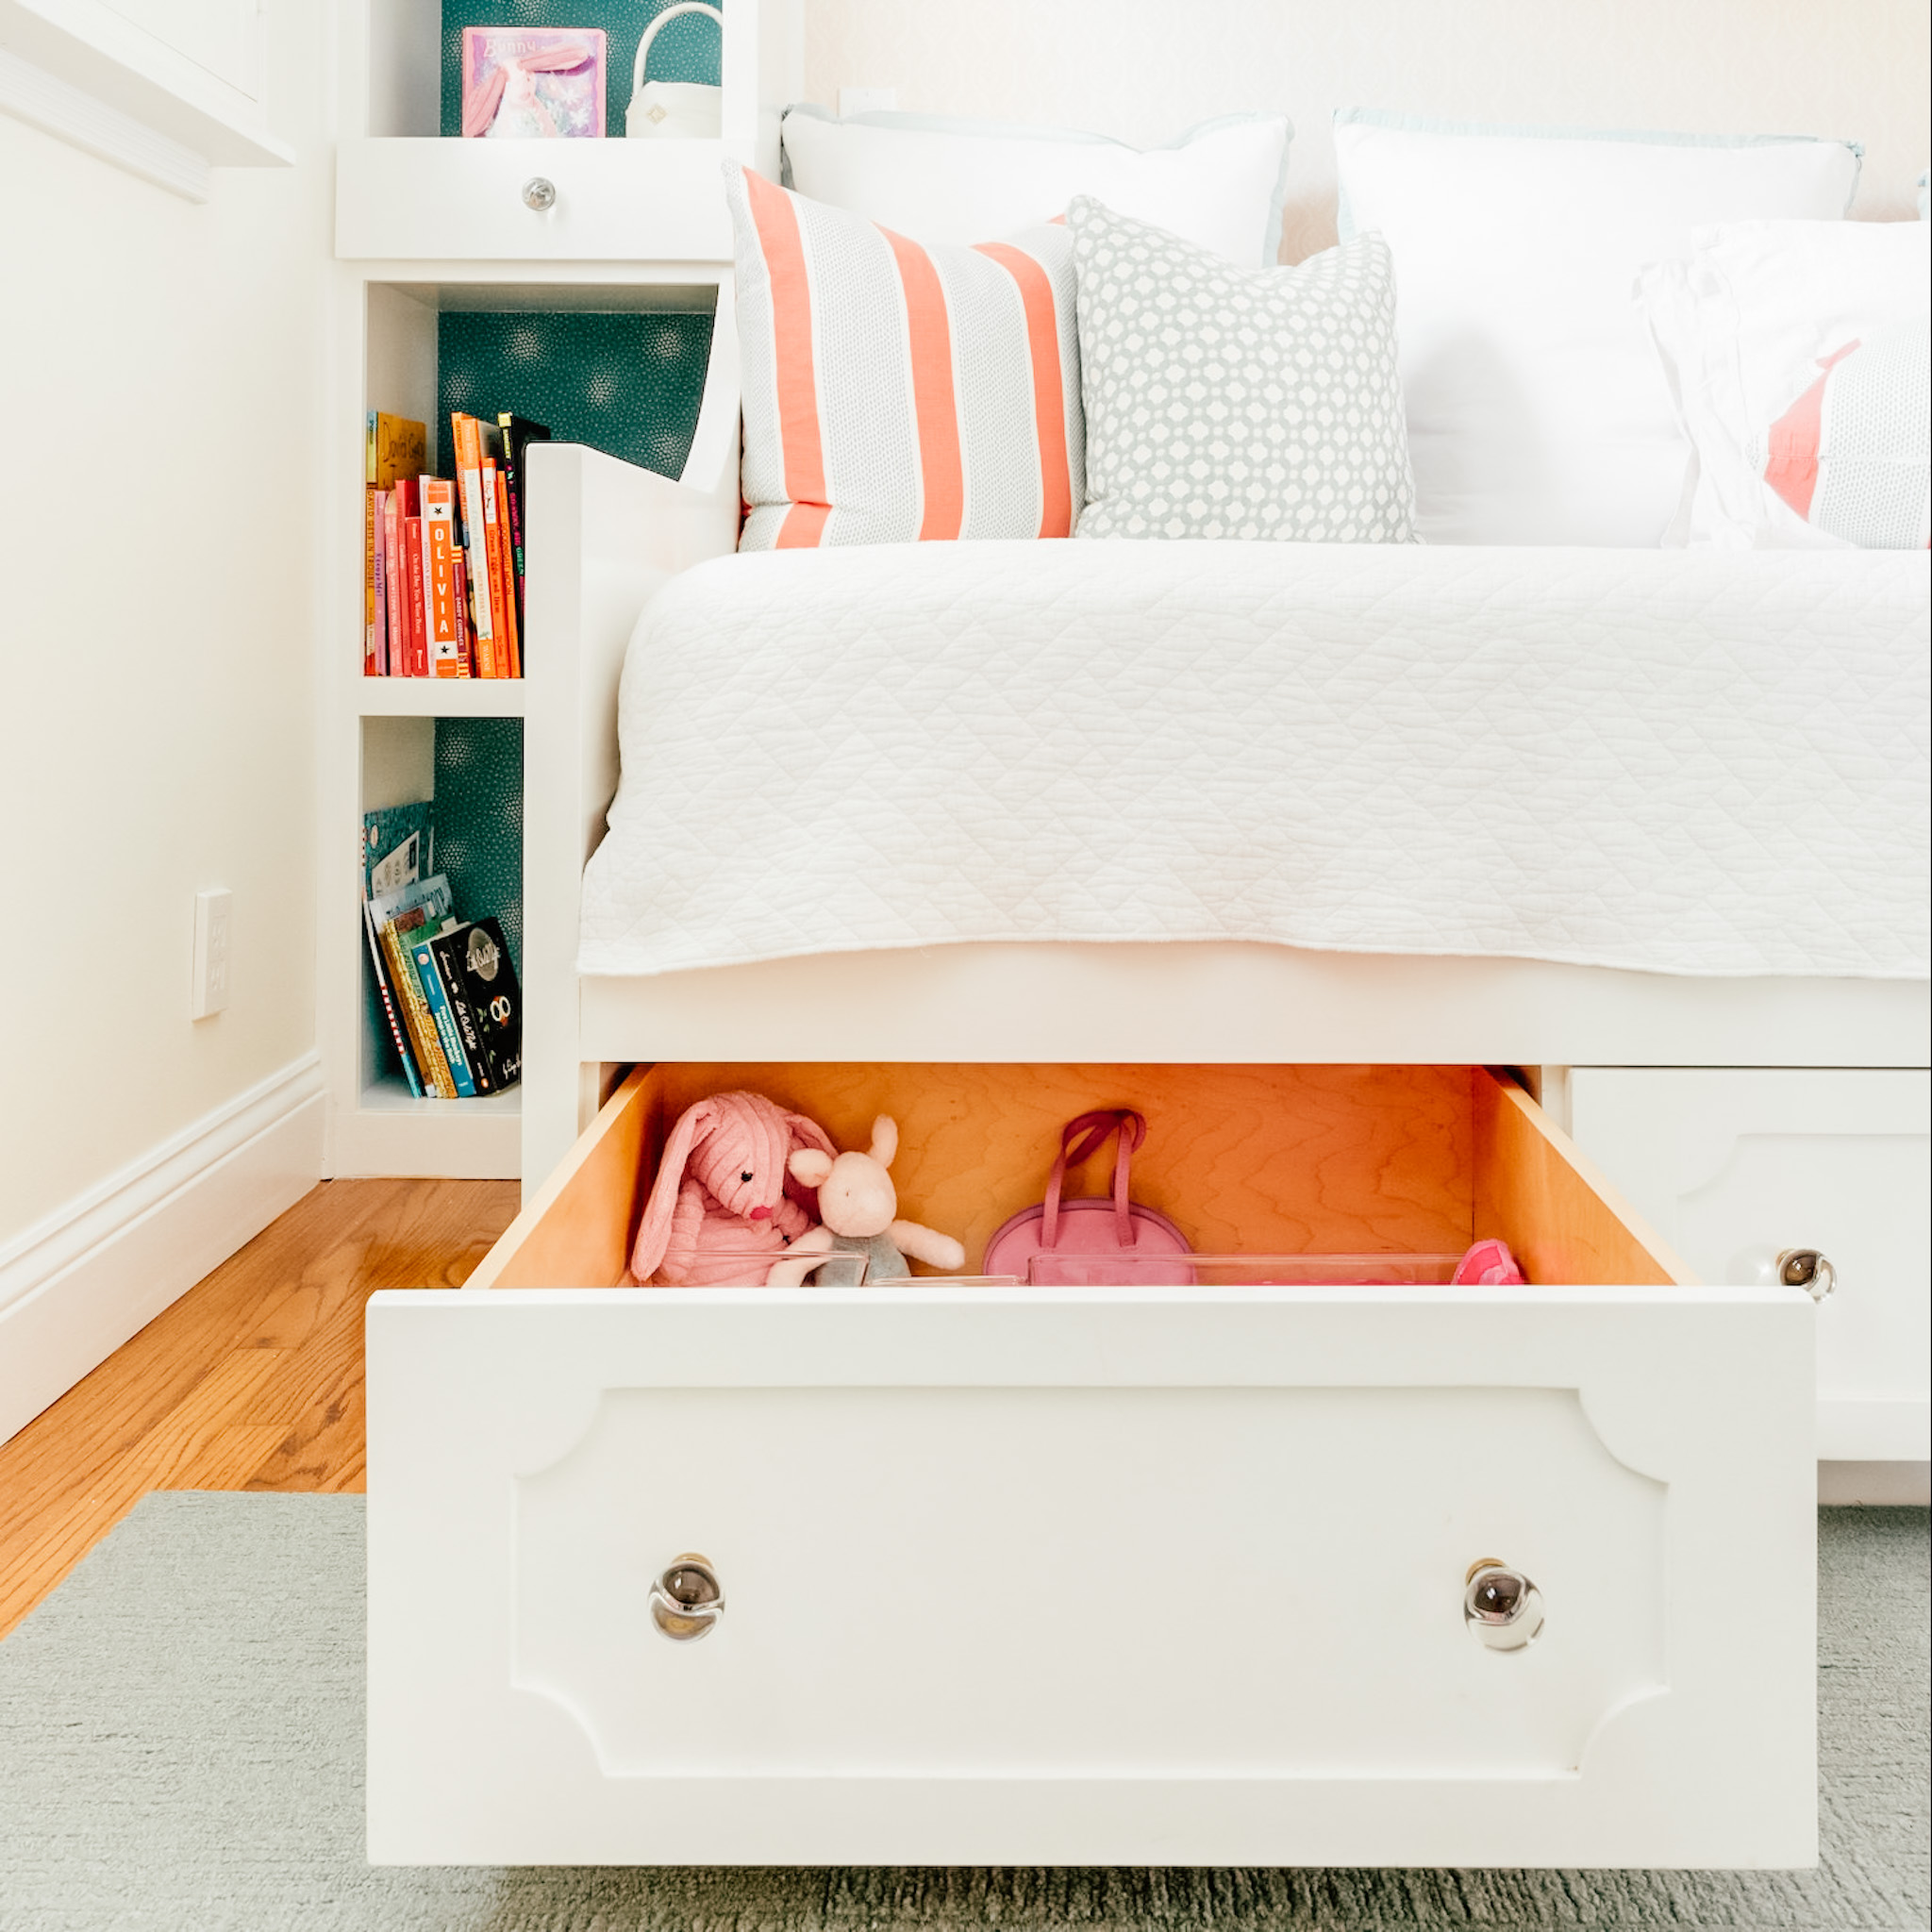 A day bed with a pull-out drawer open below it, filled with stuffed animals